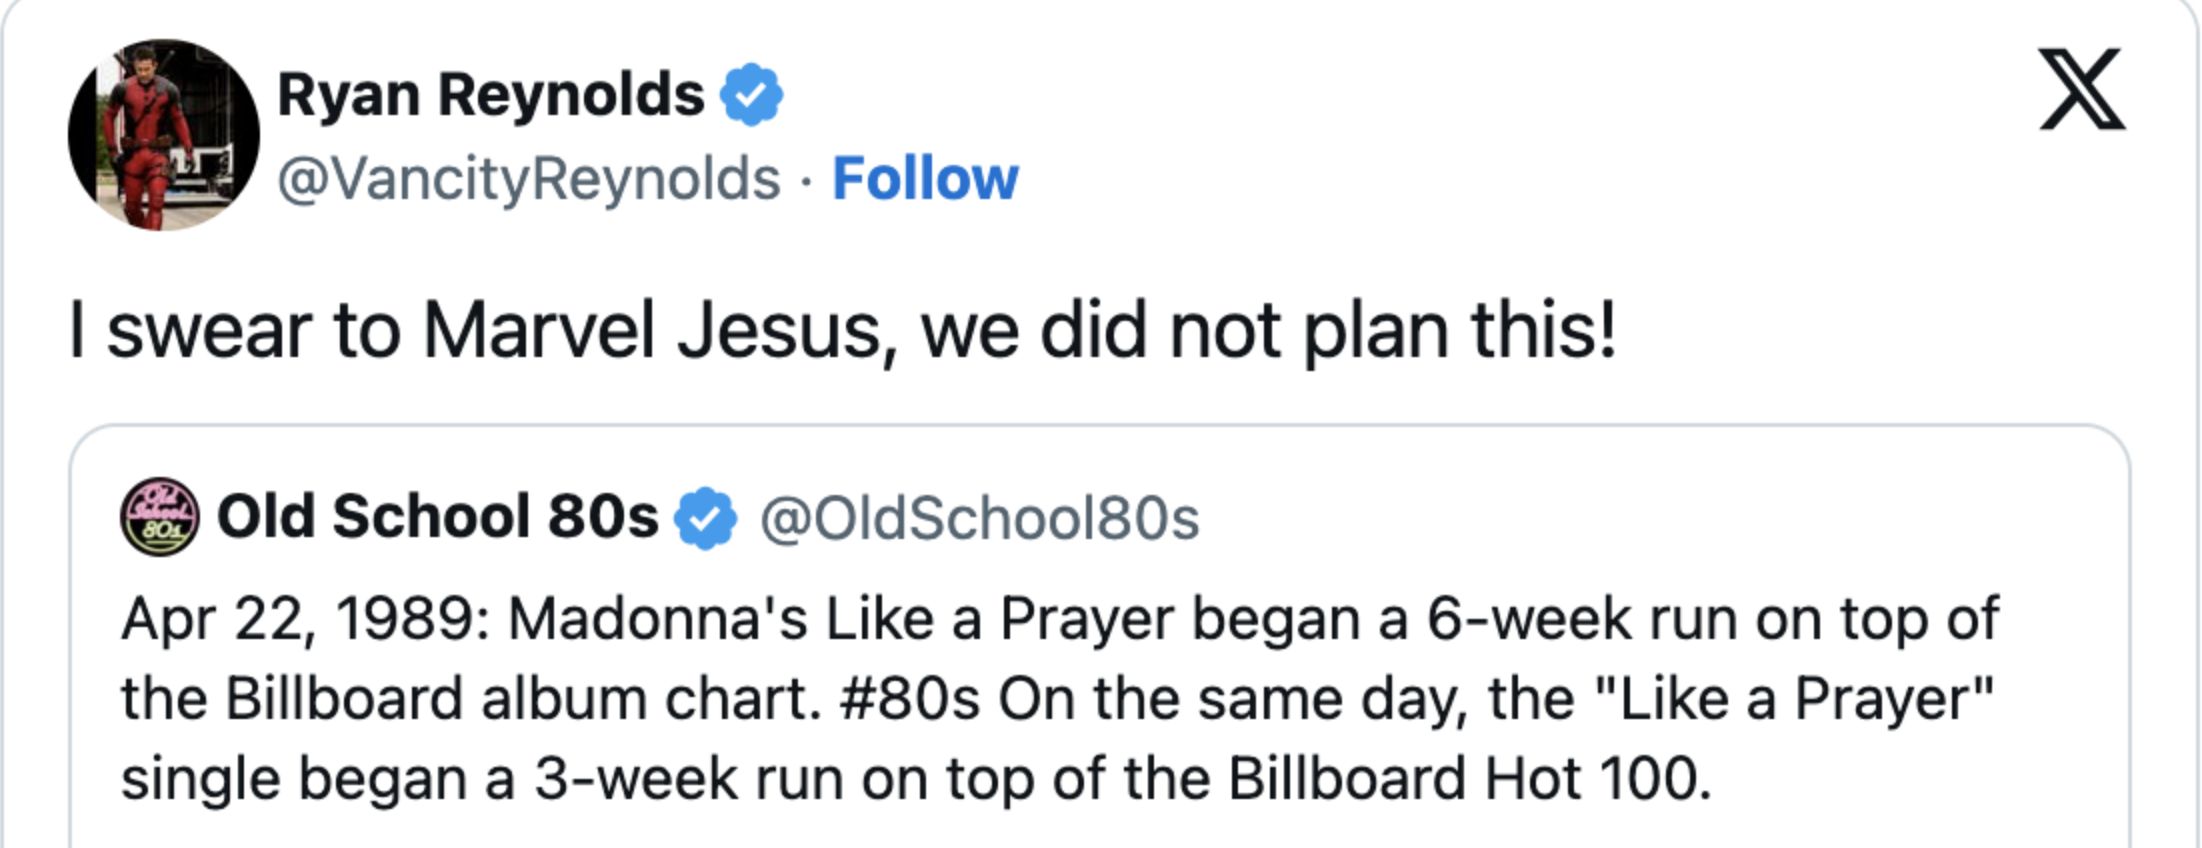 Tweet by Ryan Reynolds expressing surprise, referencing a tweet about Madonna&#x27;s &quot;Like a Prayer&quot; coincidences